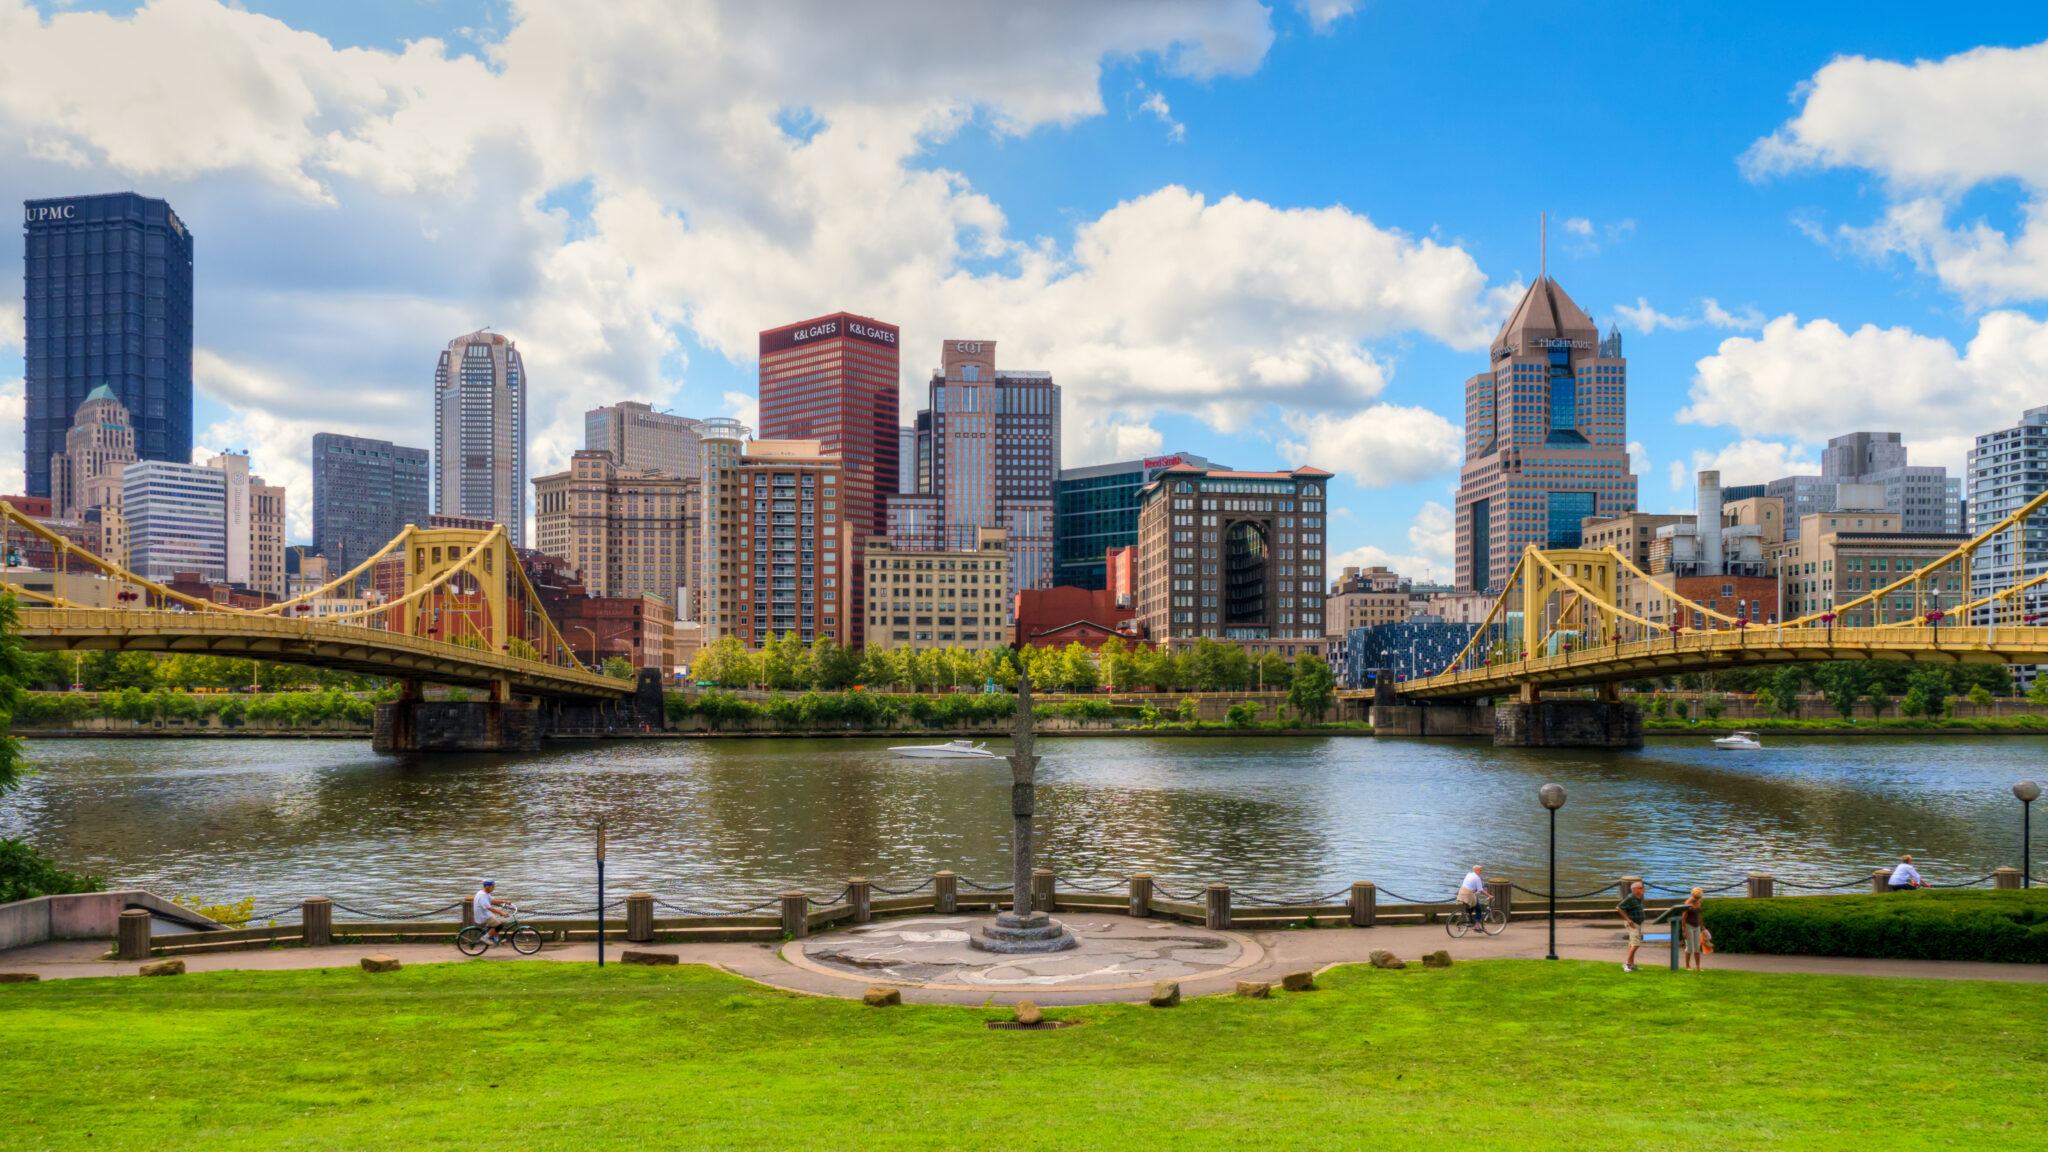 Sunny skyline view of downtown Pittsburgh as seen between the Andy Warhol Bridge and the Roberto Clemente Bridge